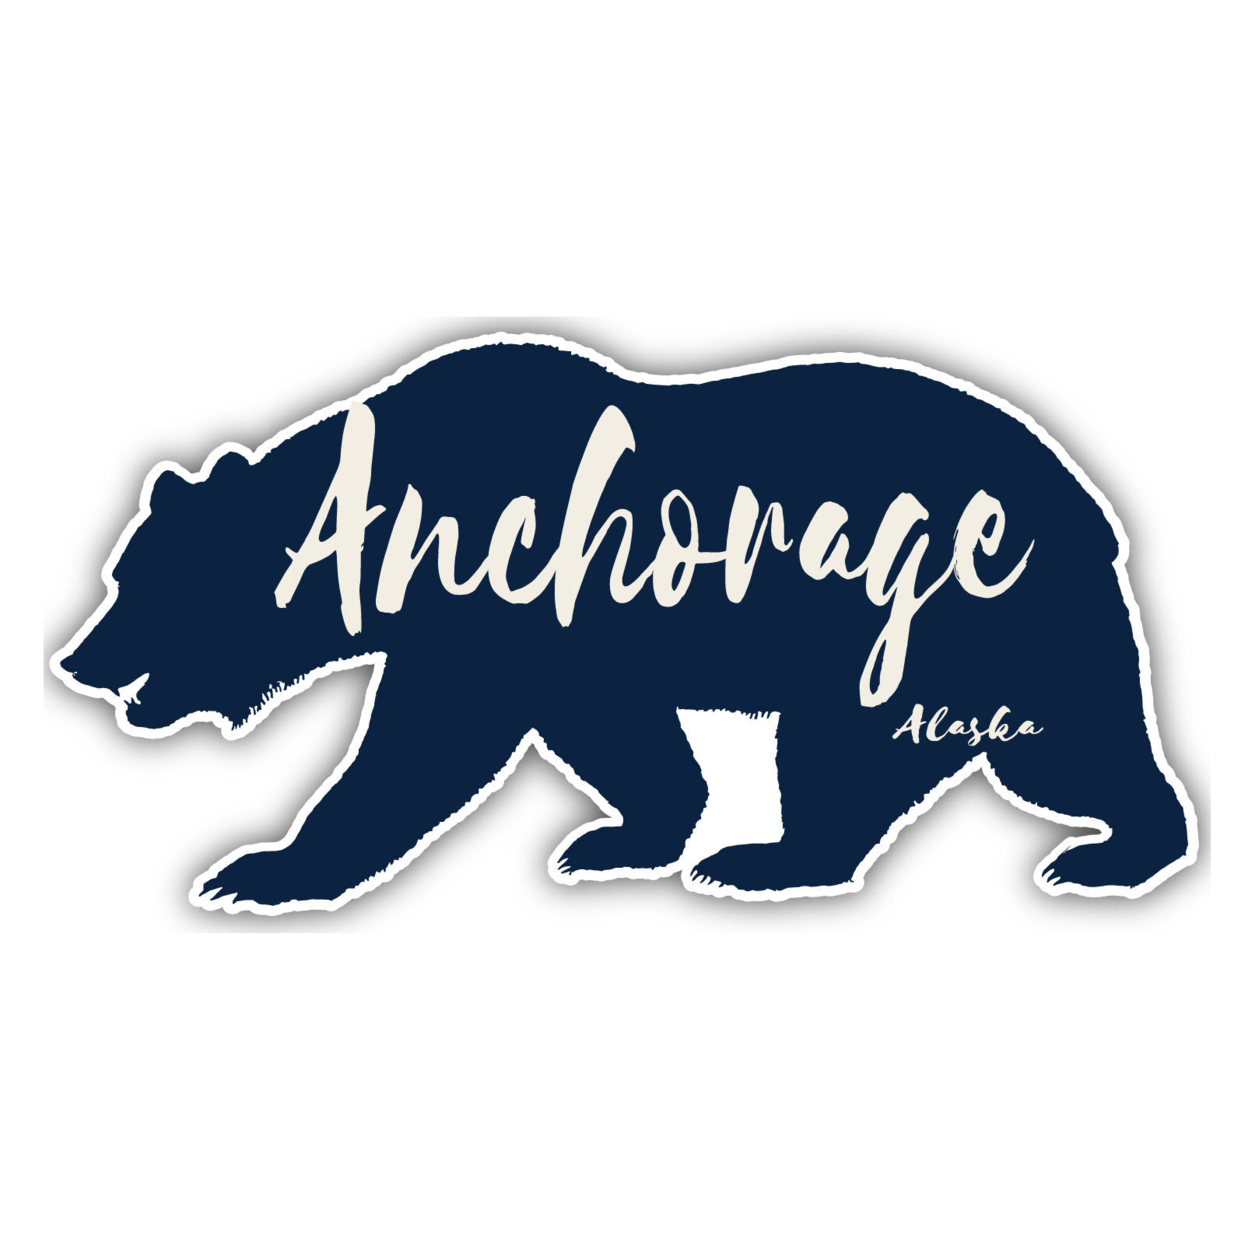 Anchorage Alaska Souvenir Decorative Stickers (Choose Theme And Size) - Single Unit, 10-Inch, Great Outdoors